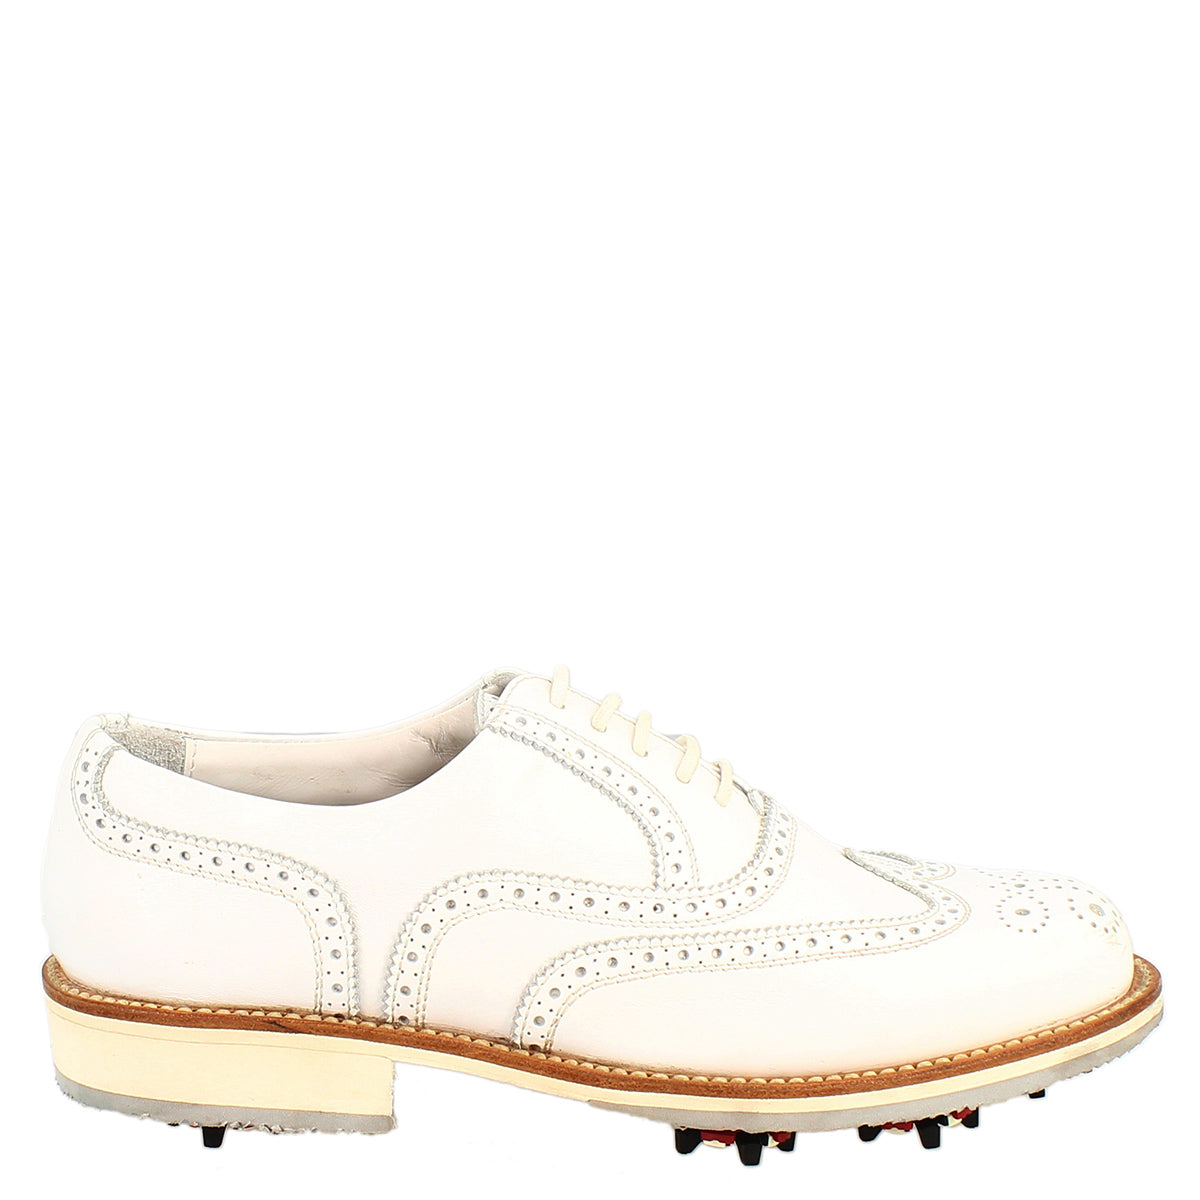 Classic brogues women's golf shoes handmade in white calf leather